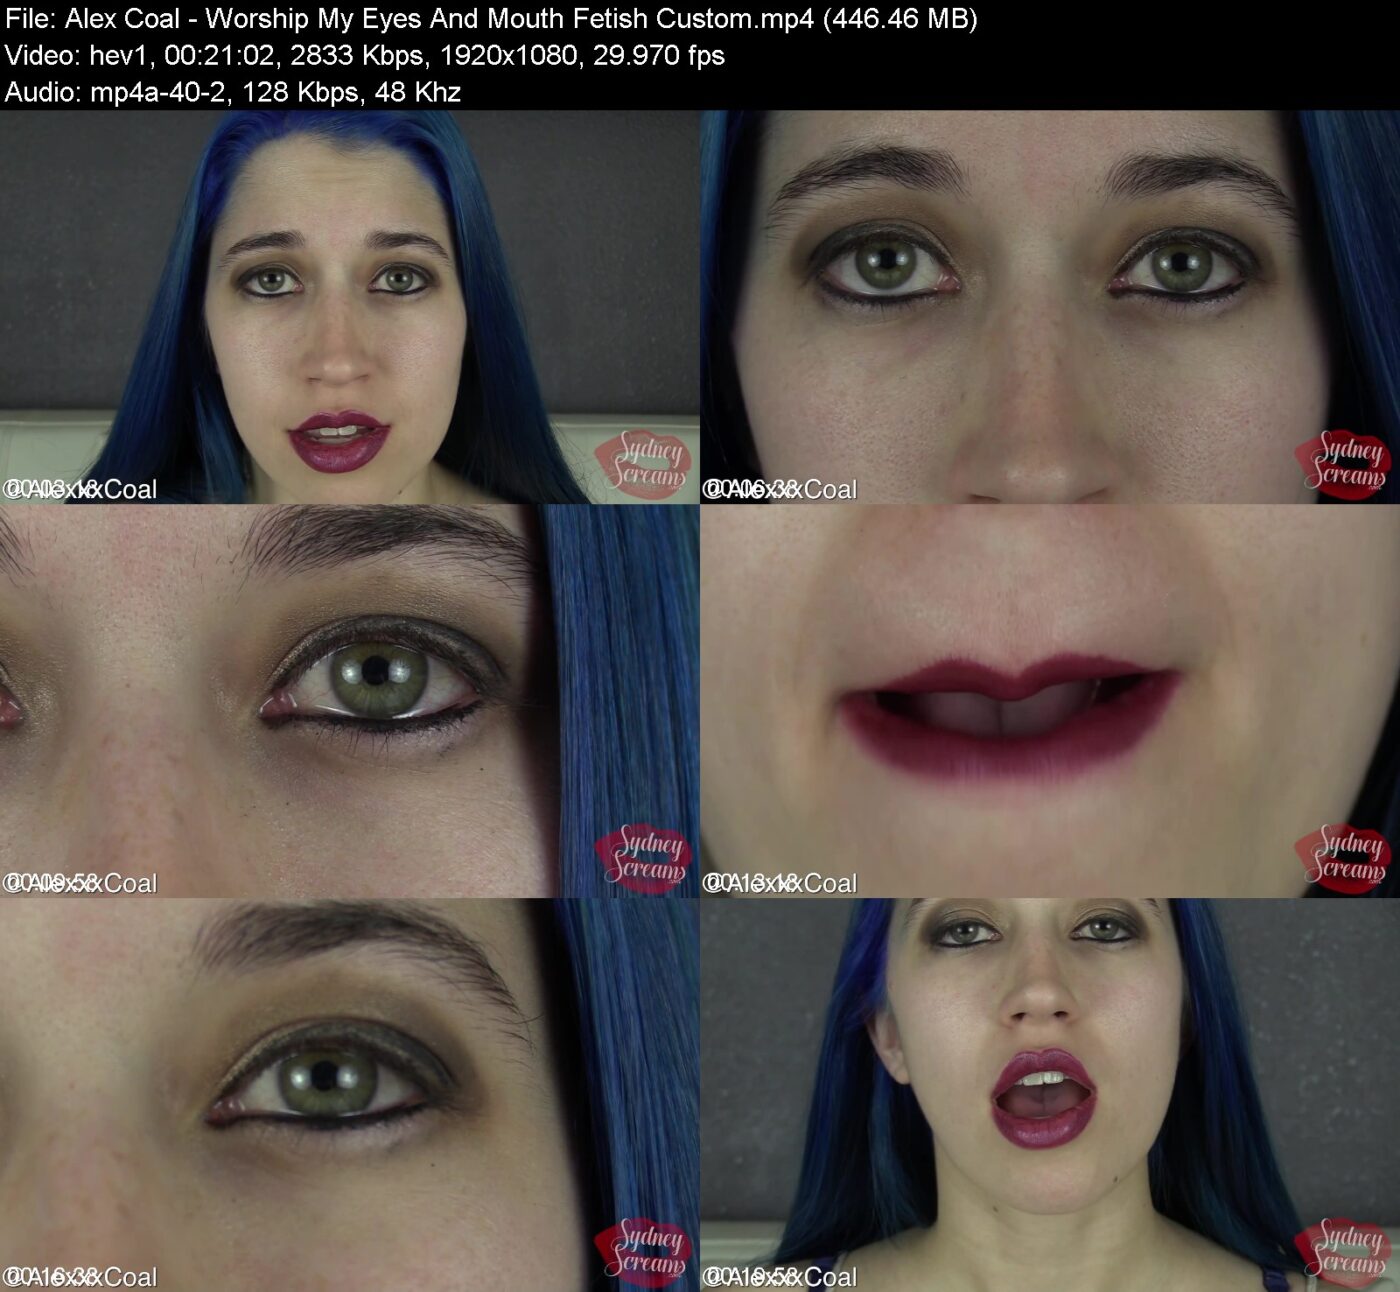 Actress: Alex Coal. Title and Studio: Worship My Eyes And Mouth Fetish Custom